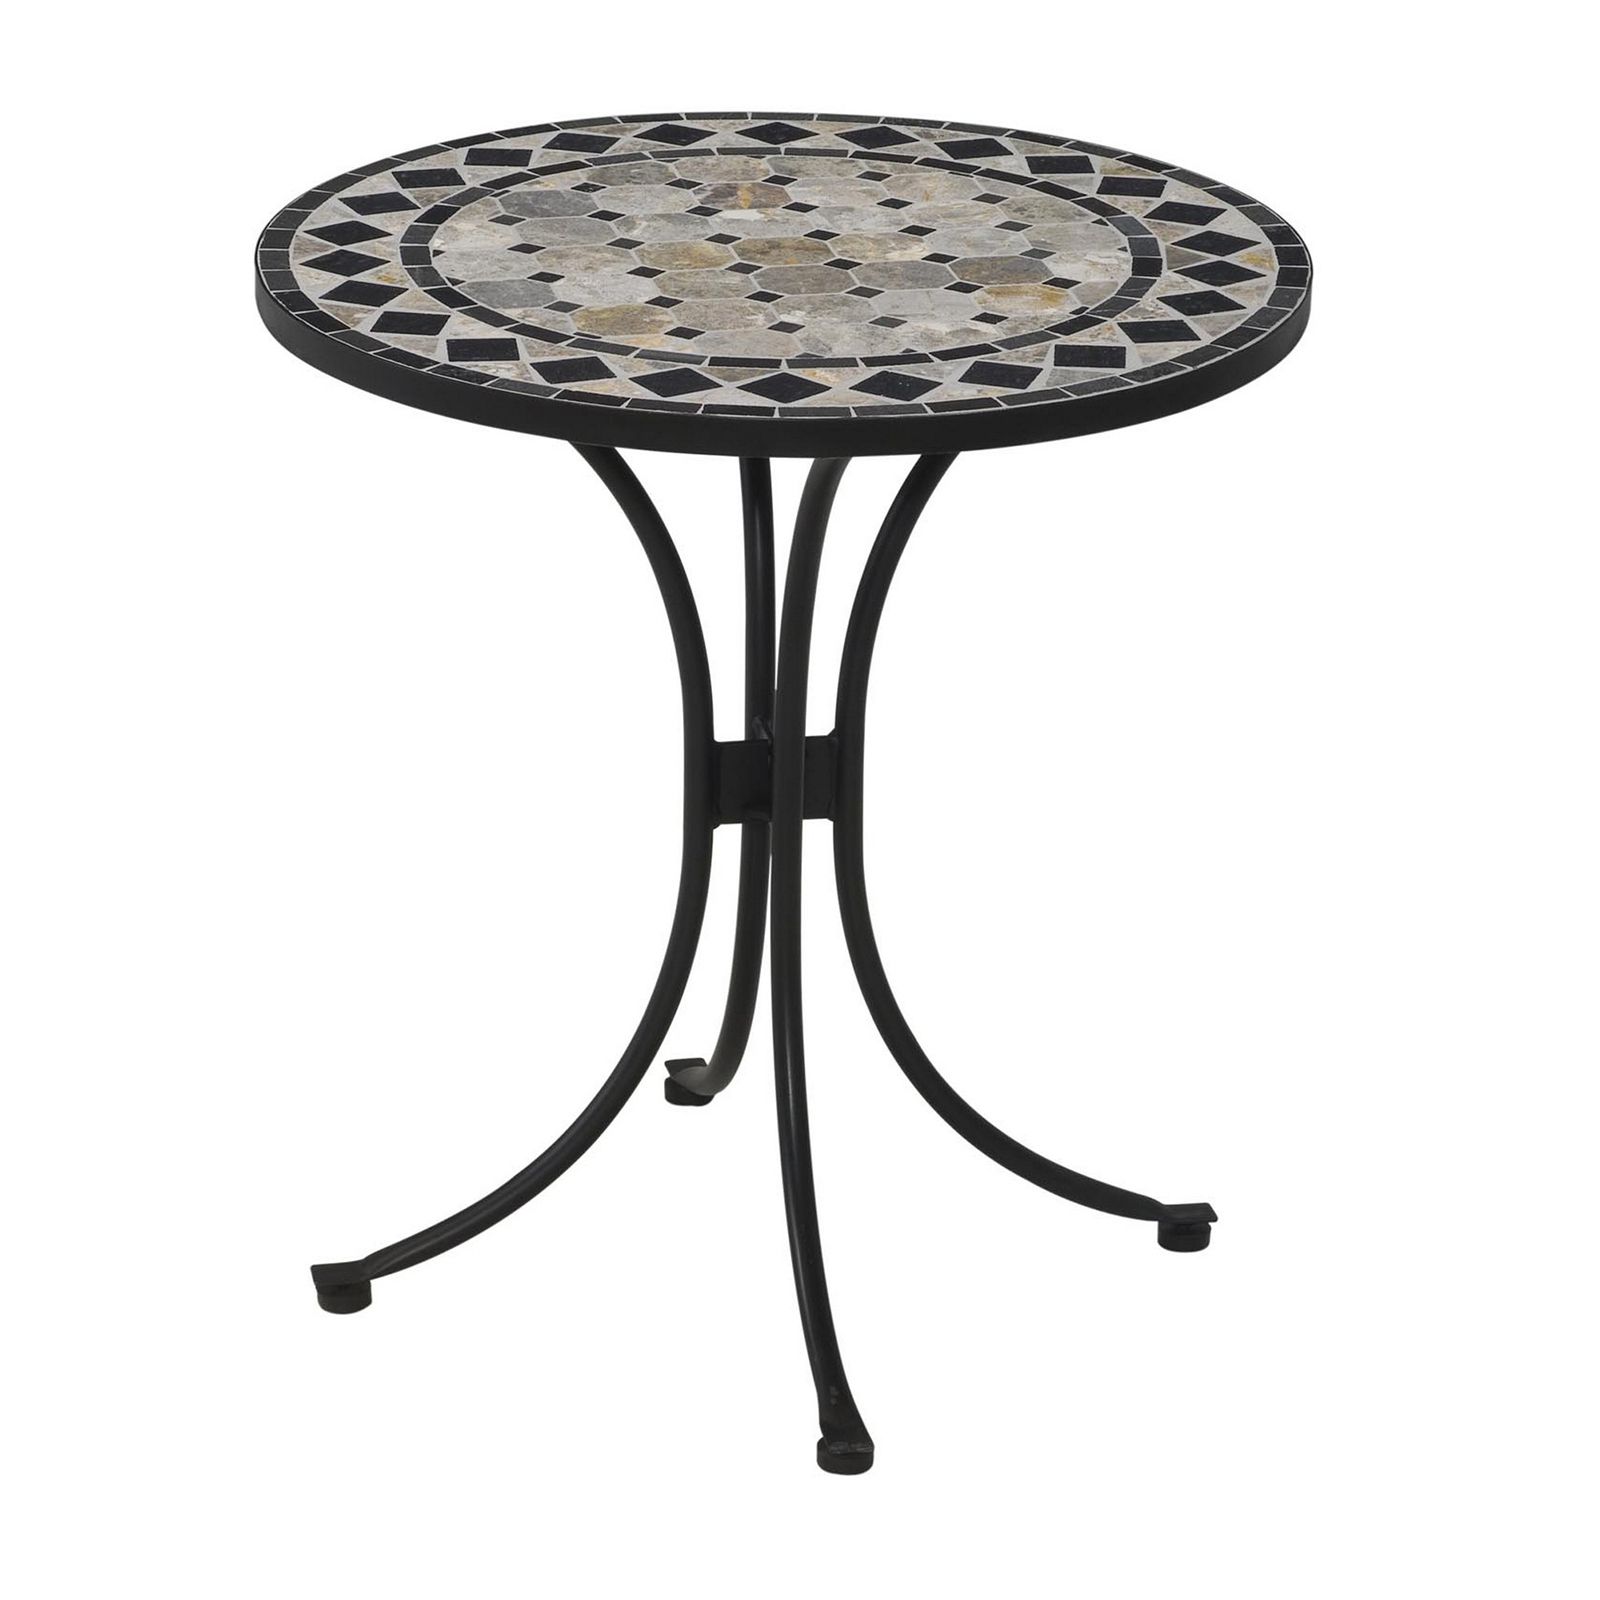 Mosaic Tile Top Round Side Tables Throughout Most Recent Home Styles Mosaic Outdoor Bistro Table – Patio Dining Tables At Hayneedle (View 2 of 15)